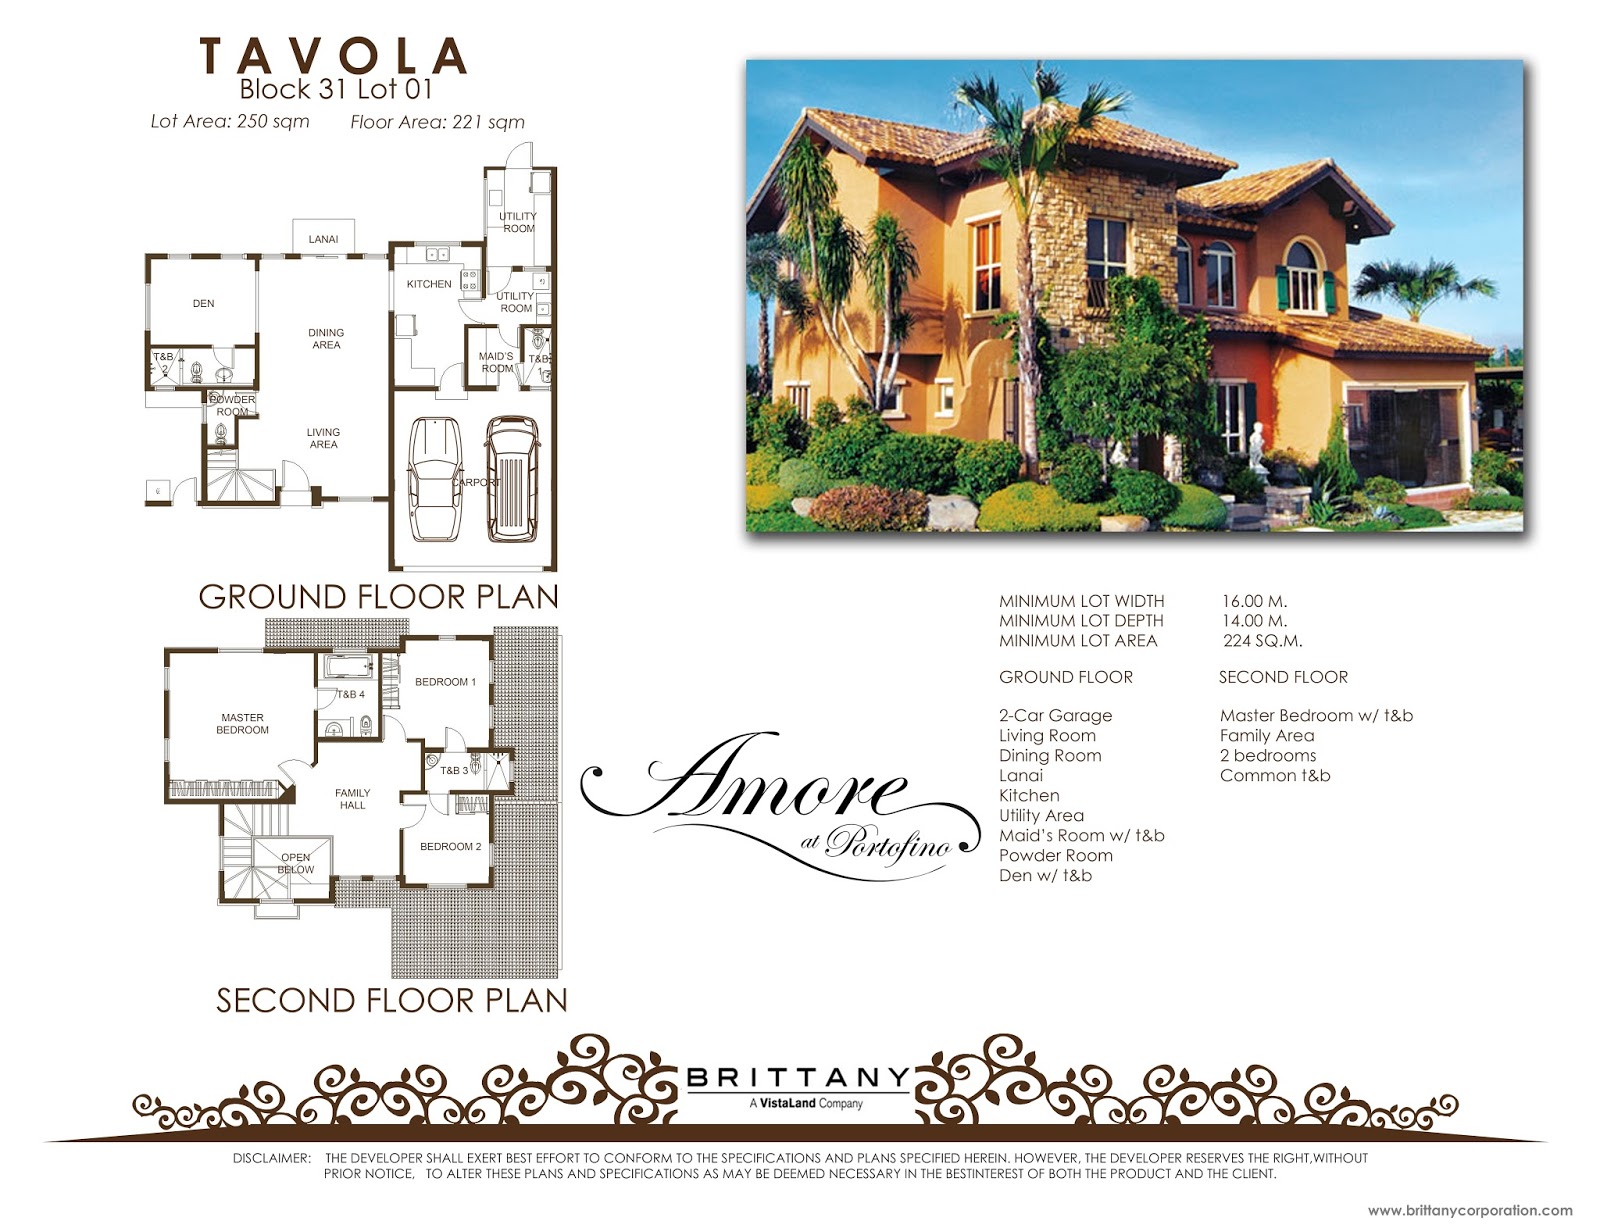 Photos of Tavola Ready Home - Amore Portofino | Luxury House and Lot for Sale Daang Reyna Las Pinas